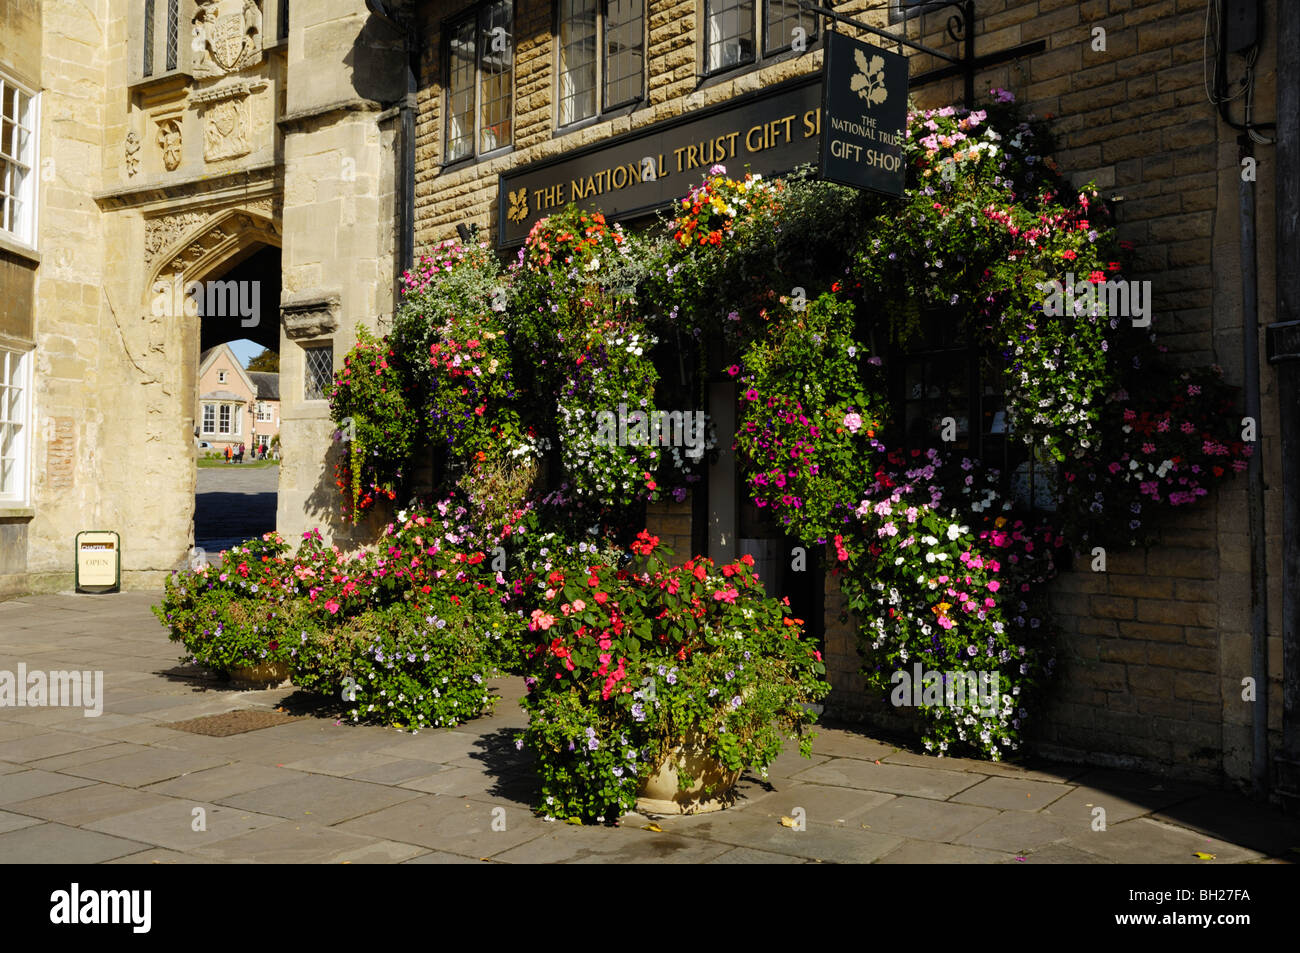 A floral display outside the National Trust gift shop by Penniless Porch in the Market Place, Wells, Somerset, England Stock Photo